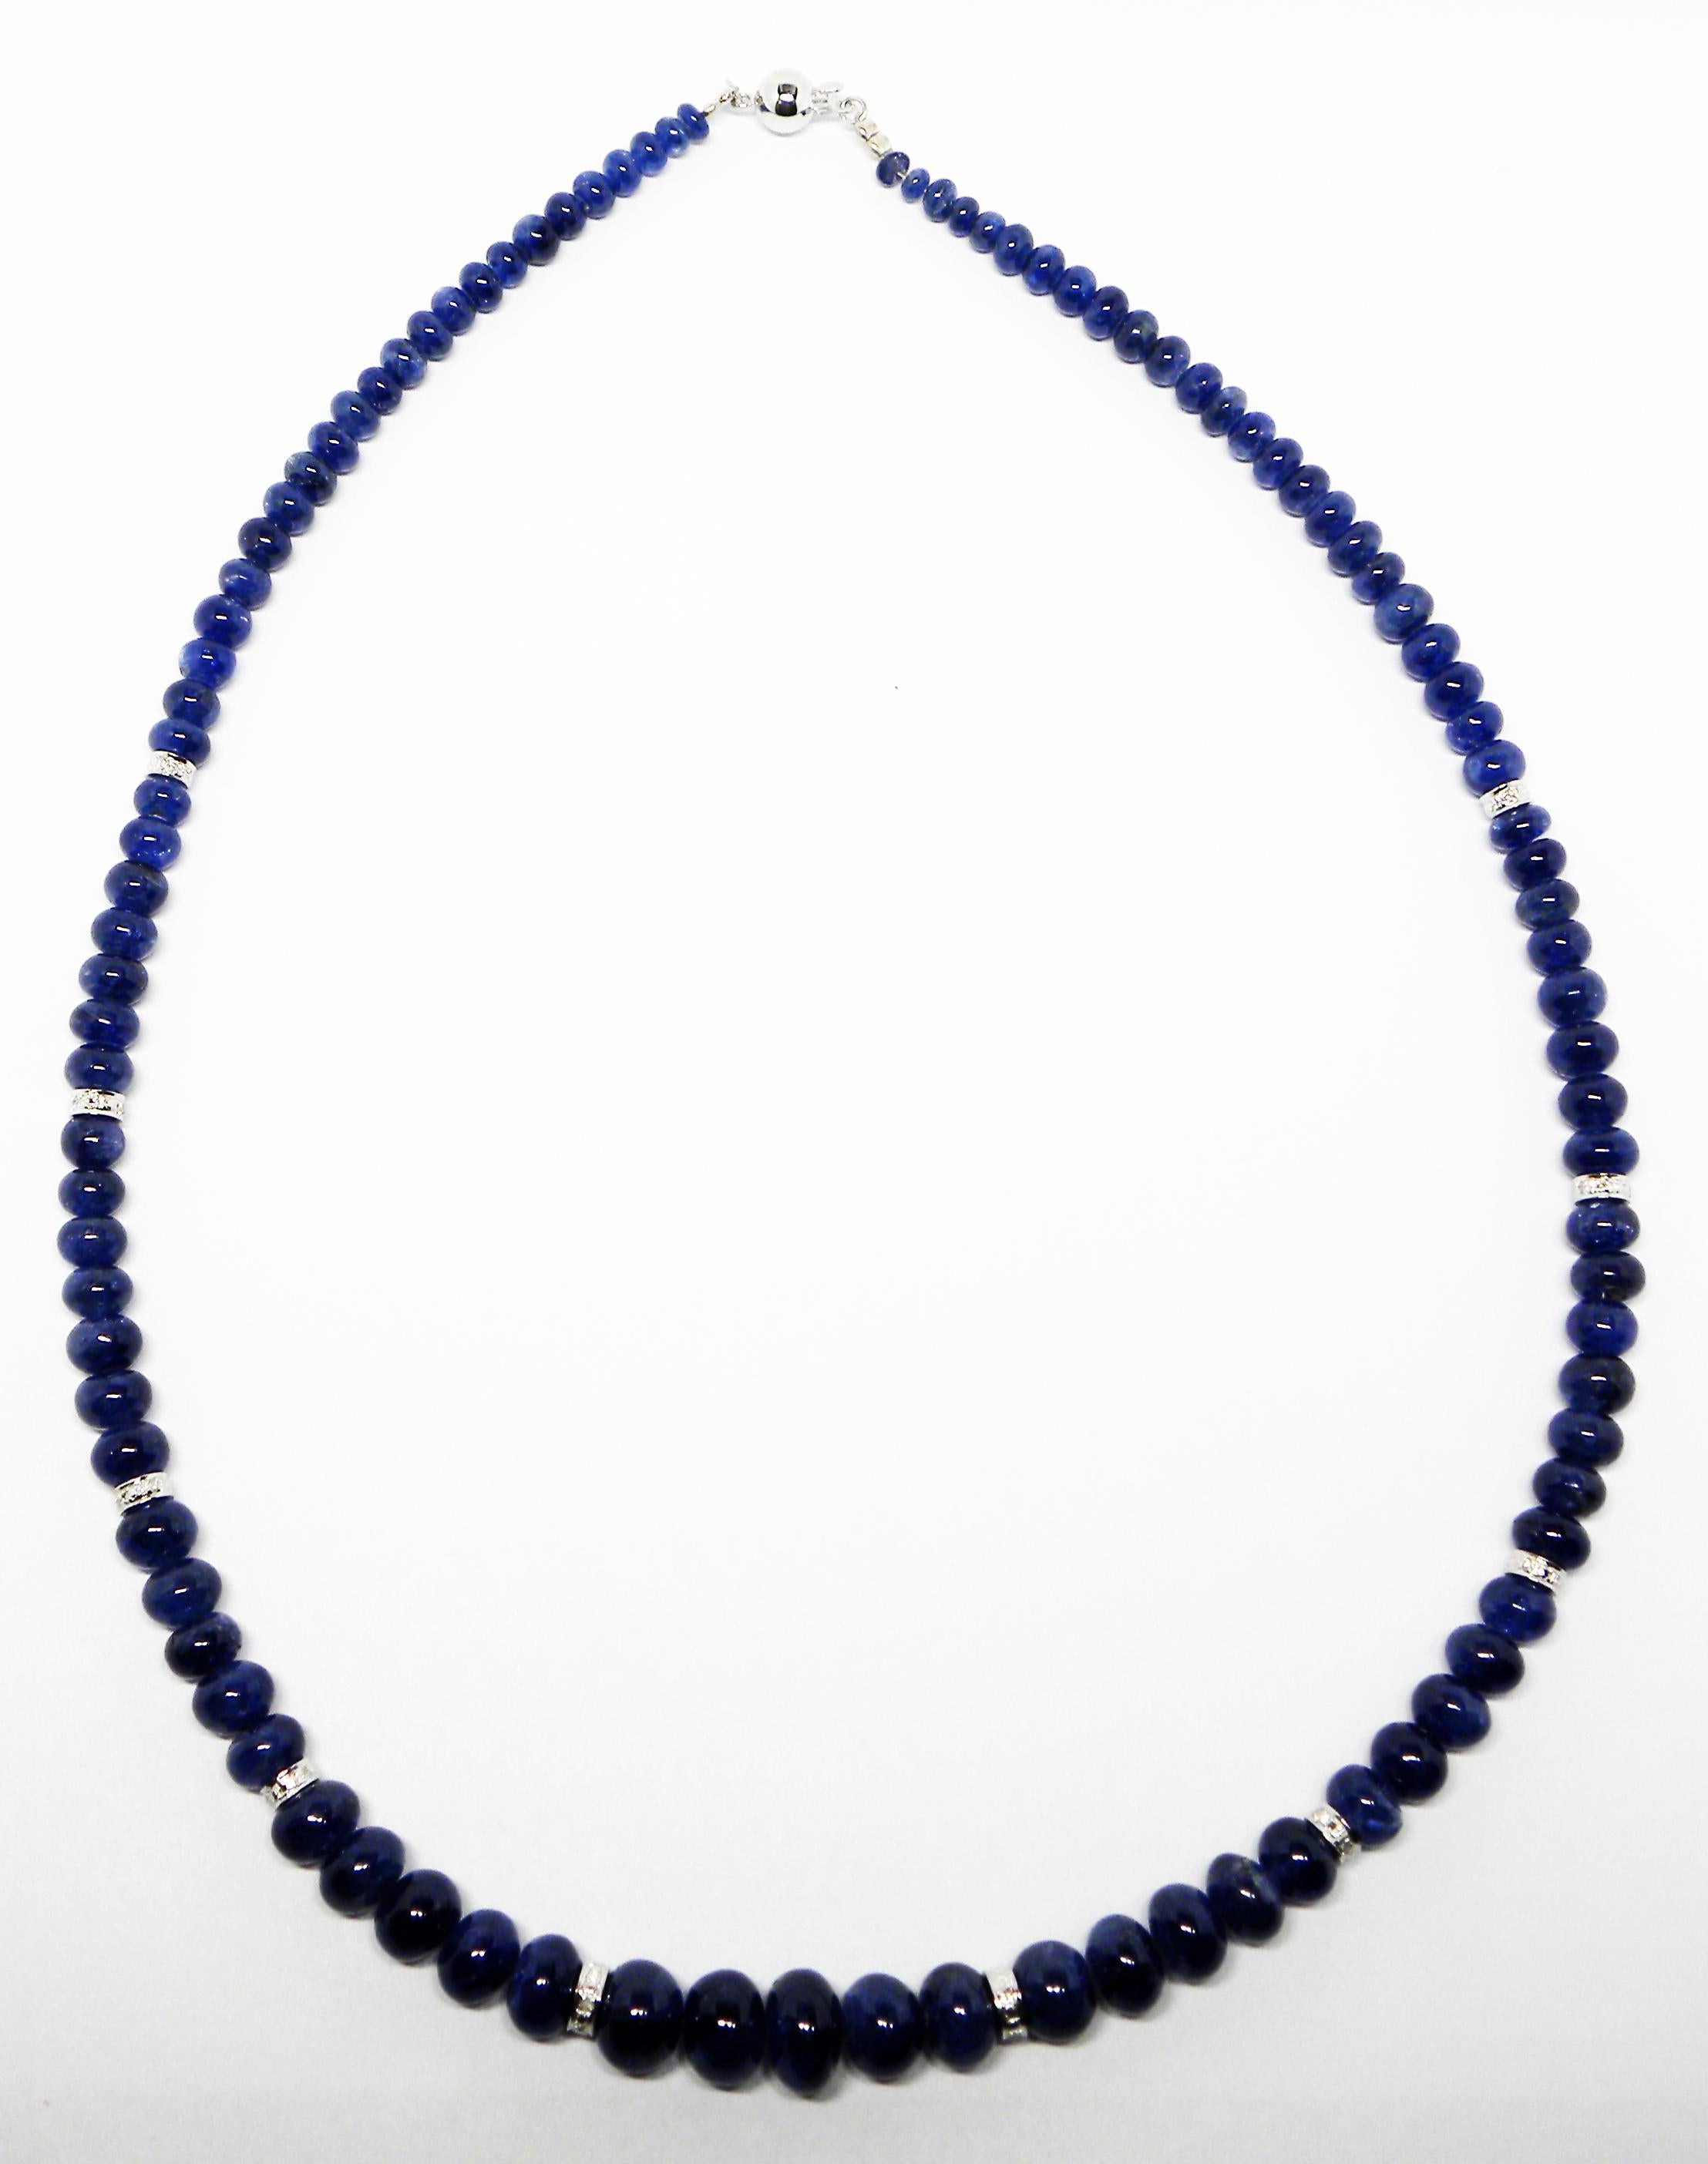 Blue Sapphire Beads Cts 188.06 and Diamond Roundel Necklace With 18k White Gold  For Sale 2